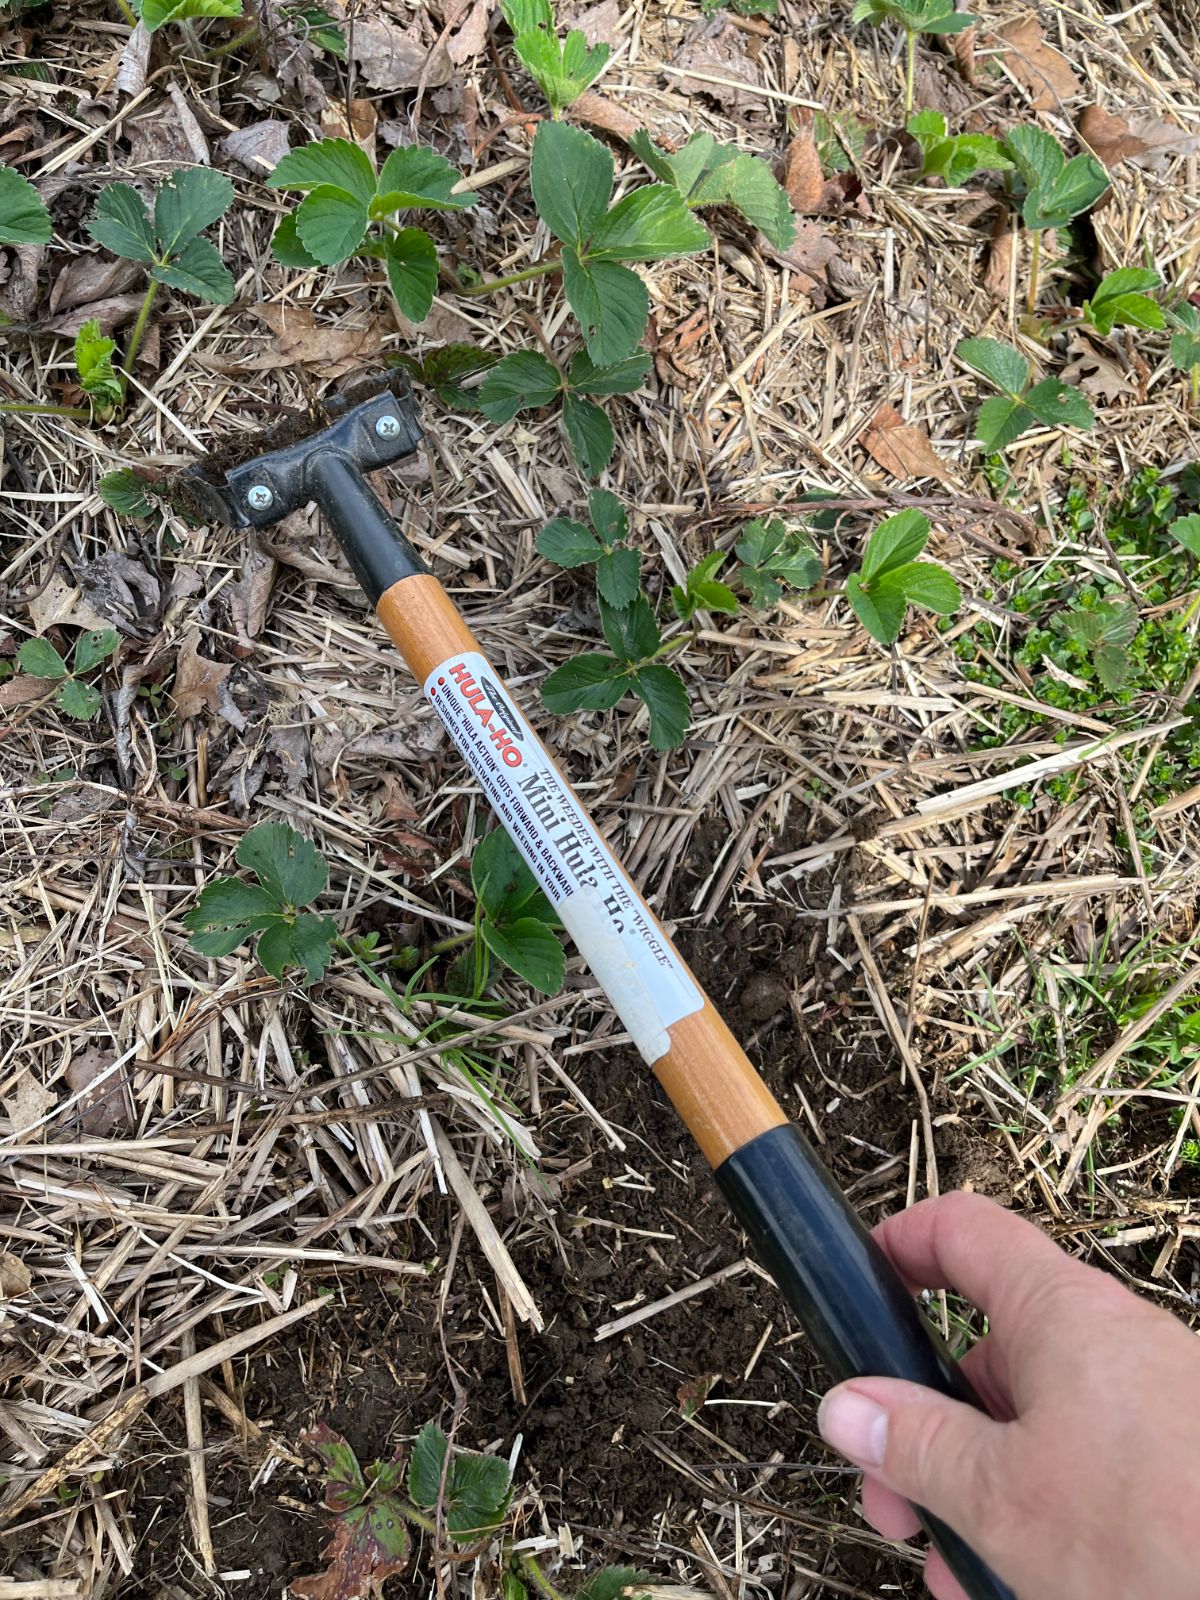 A gardener weeding with a handheld hula hoe